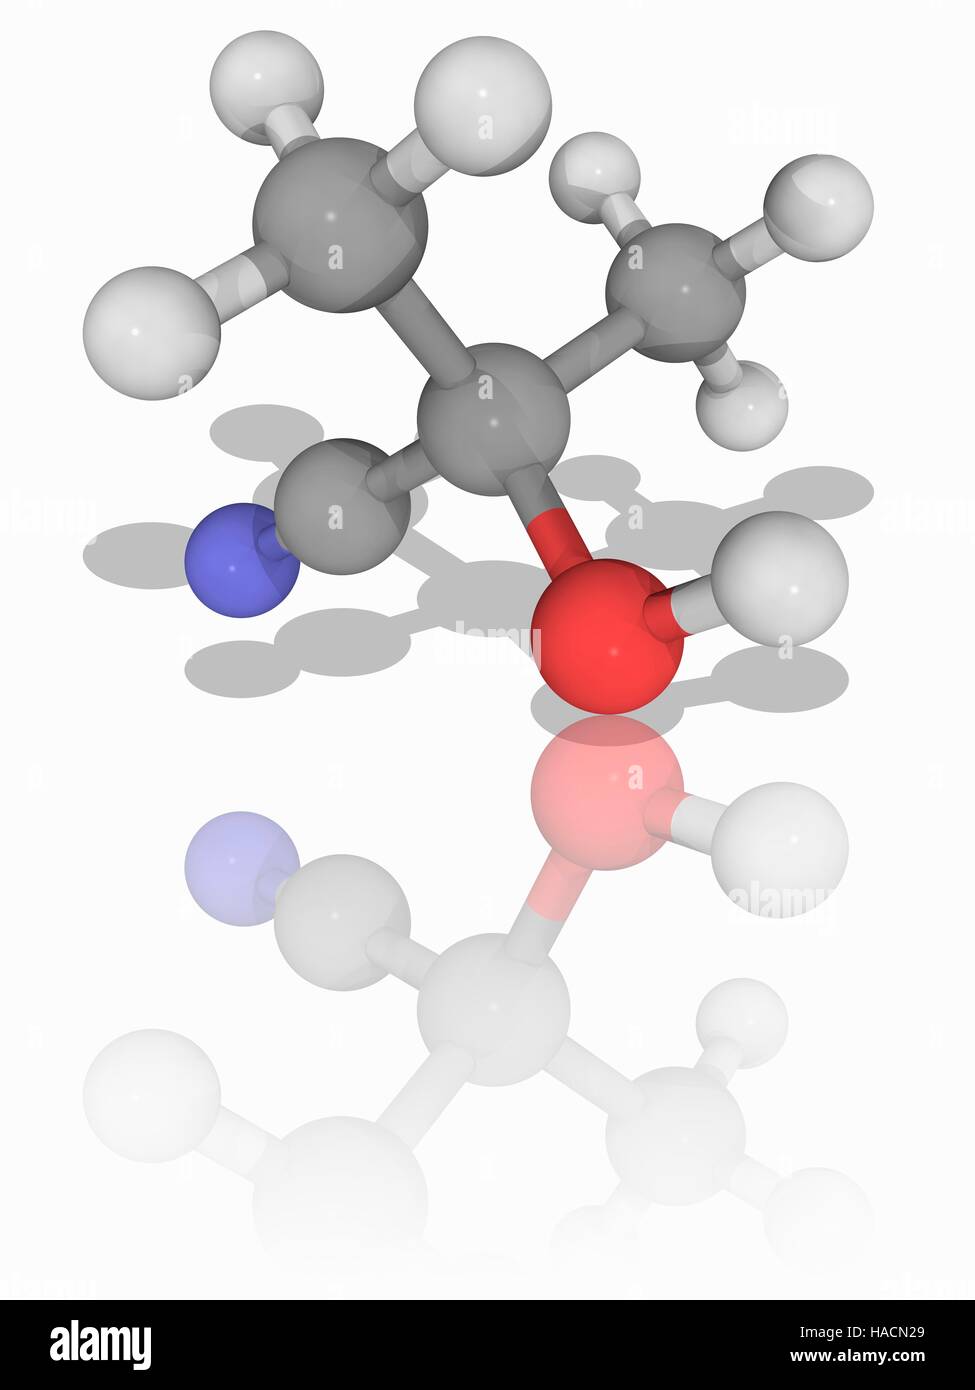 Acetone cyanohydrin. Molecular model of the organic compound acetone  cyanohydrin (C4.H7.N.O). This organic compound is used in the production of  plastics such as acrylic. Atoms are represented as spheres and are  colour-coded: